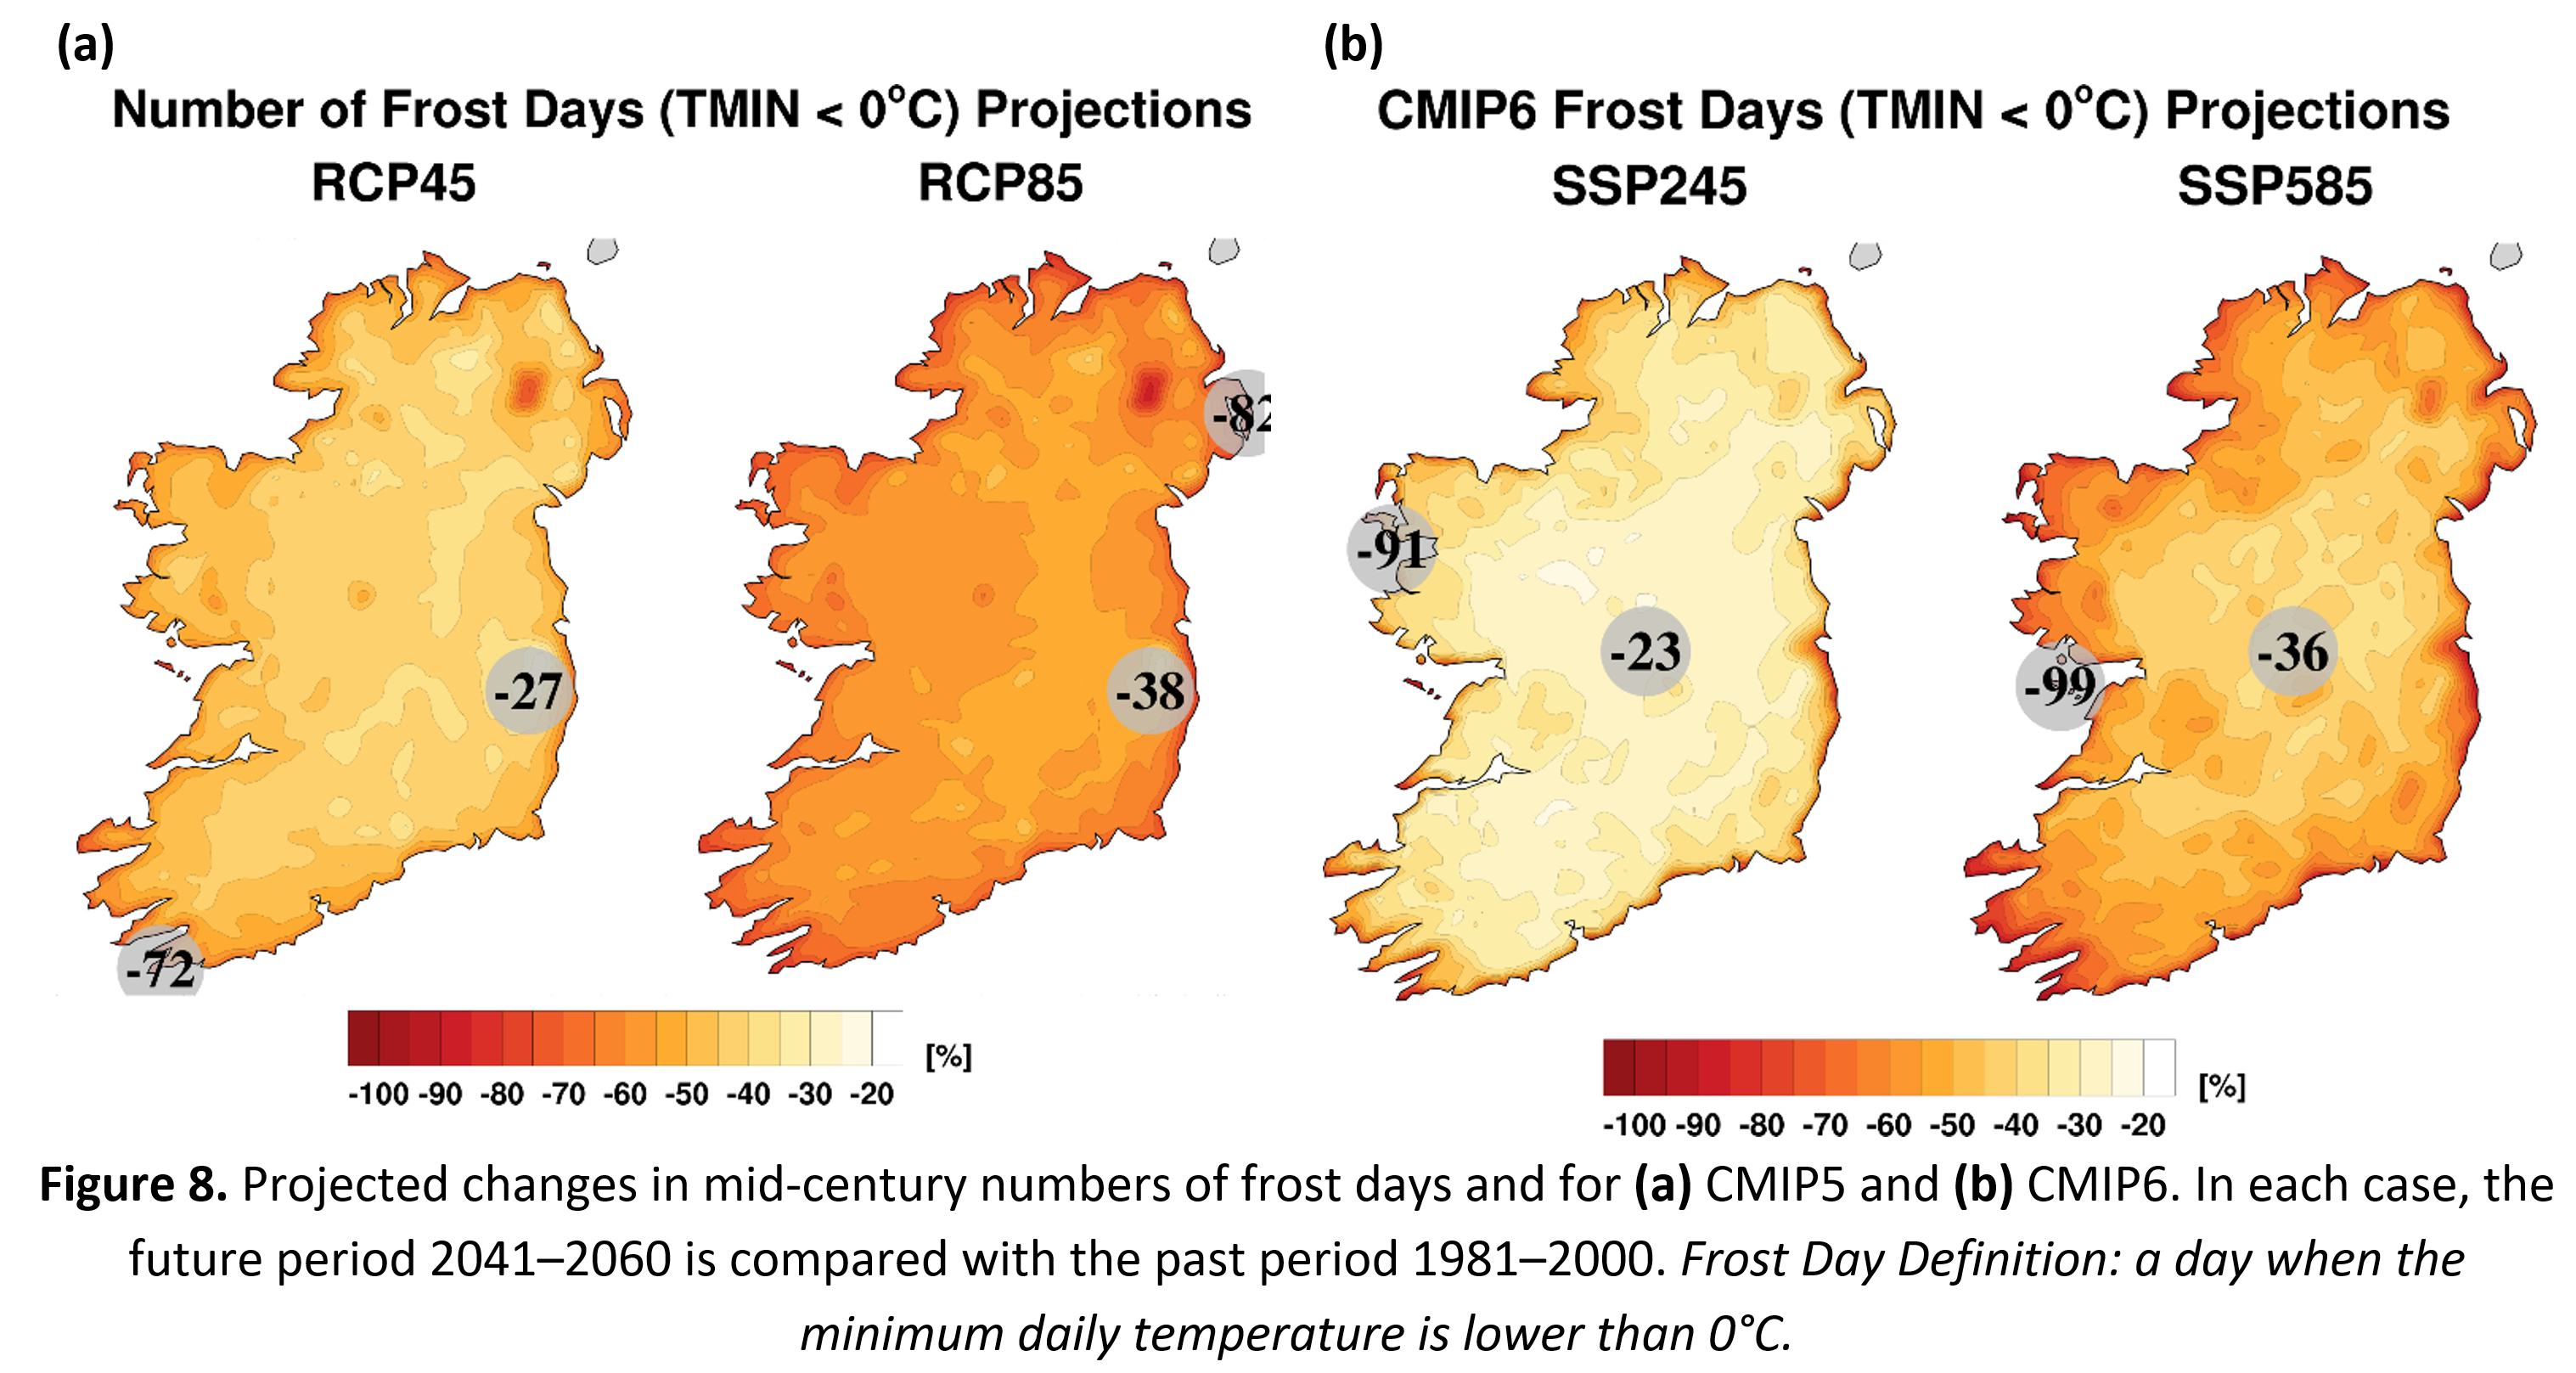 Figure 8. Projected changes in mid-century numbers of frost days and for (a) CMIP5 and (b) CMIP6. In each case, the future period 2041–2060 is compared with the past period 1981–2000. Frost Day Definition: a day when the minimum daily temperature is lower than 0°C.